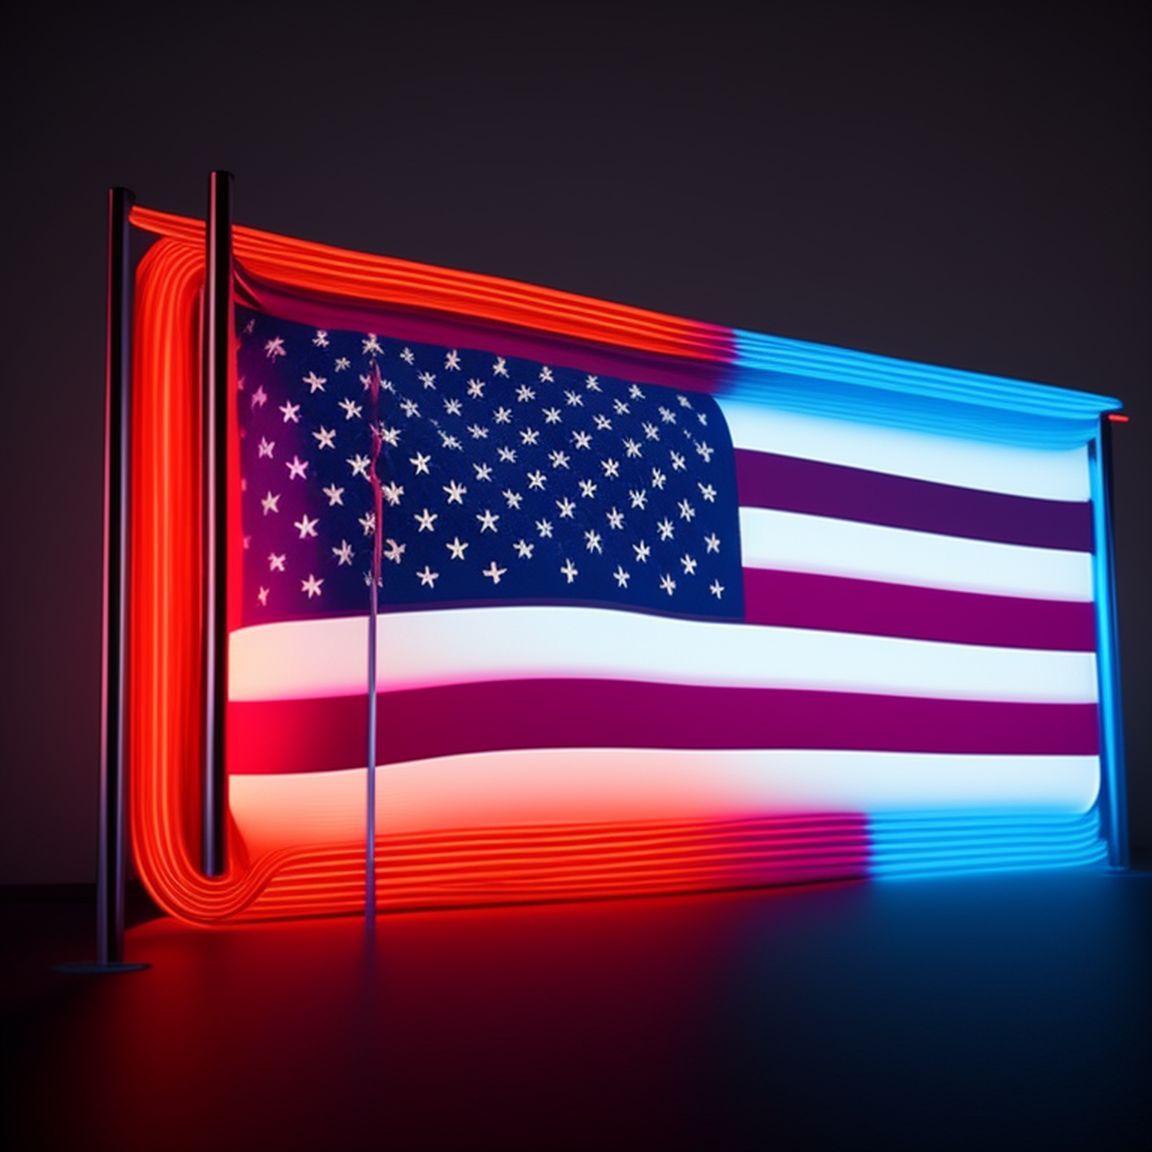 subtle-rook261: American flag. Neon on a pole in front of a courthouse